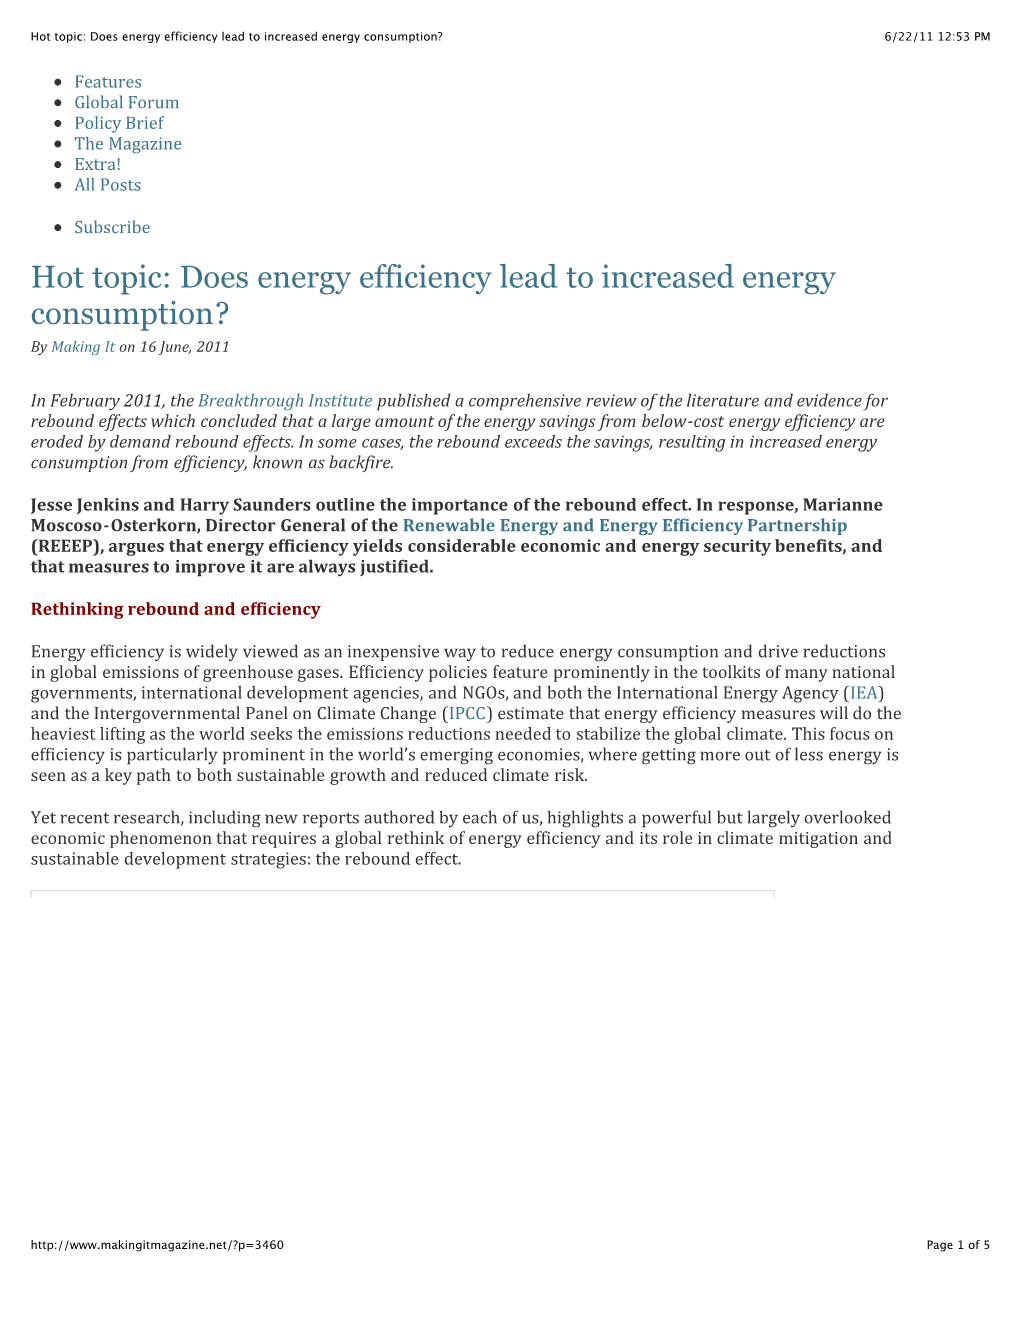 Does Energy Efficiency Lead to Increased Energy Consumption? 6/22/11 12:53 PM